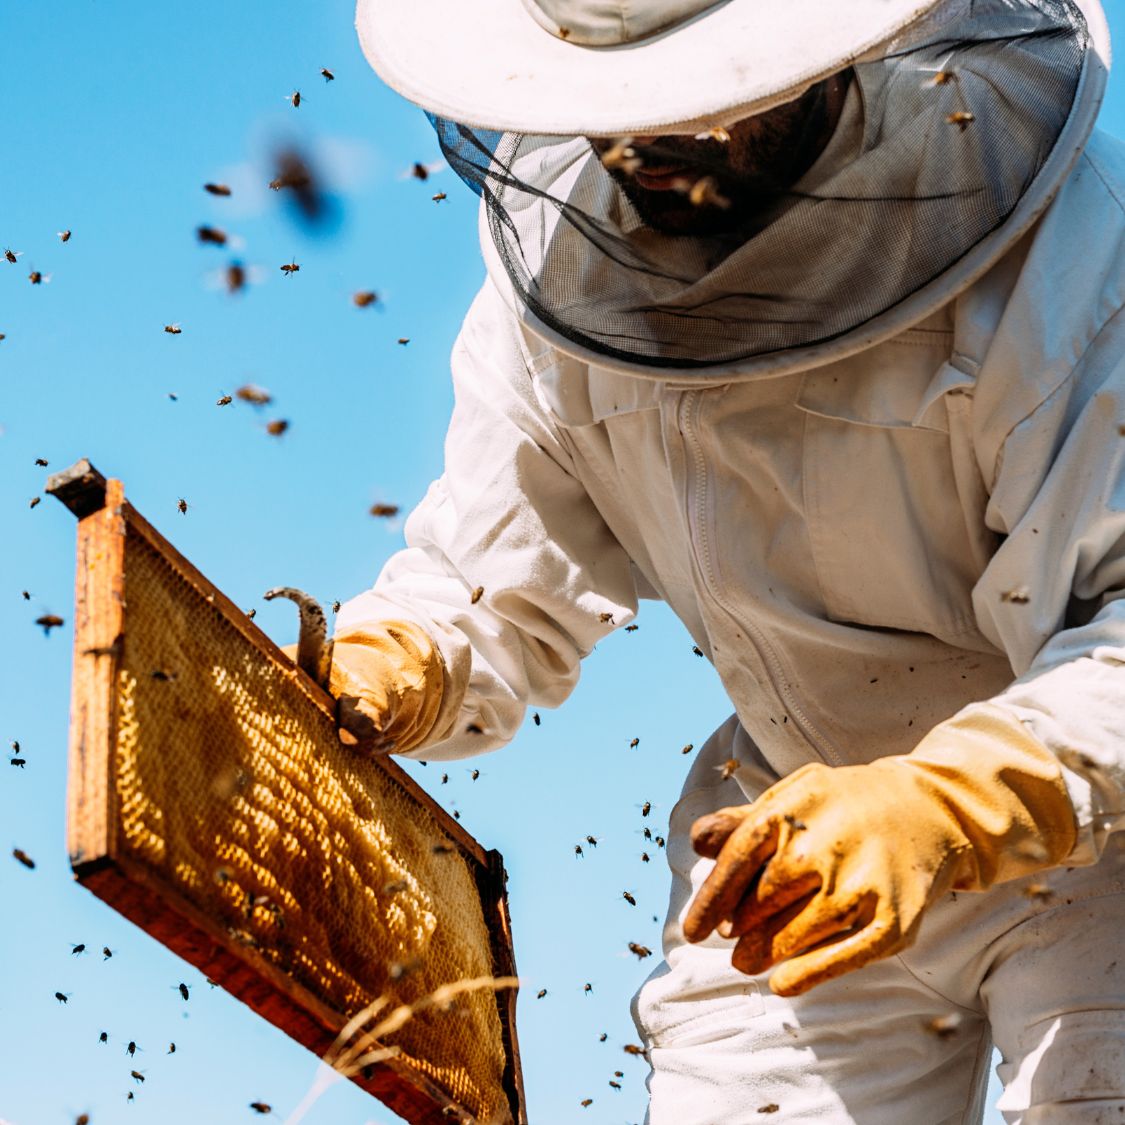 A Short History of Beekeeping and Its Evolution